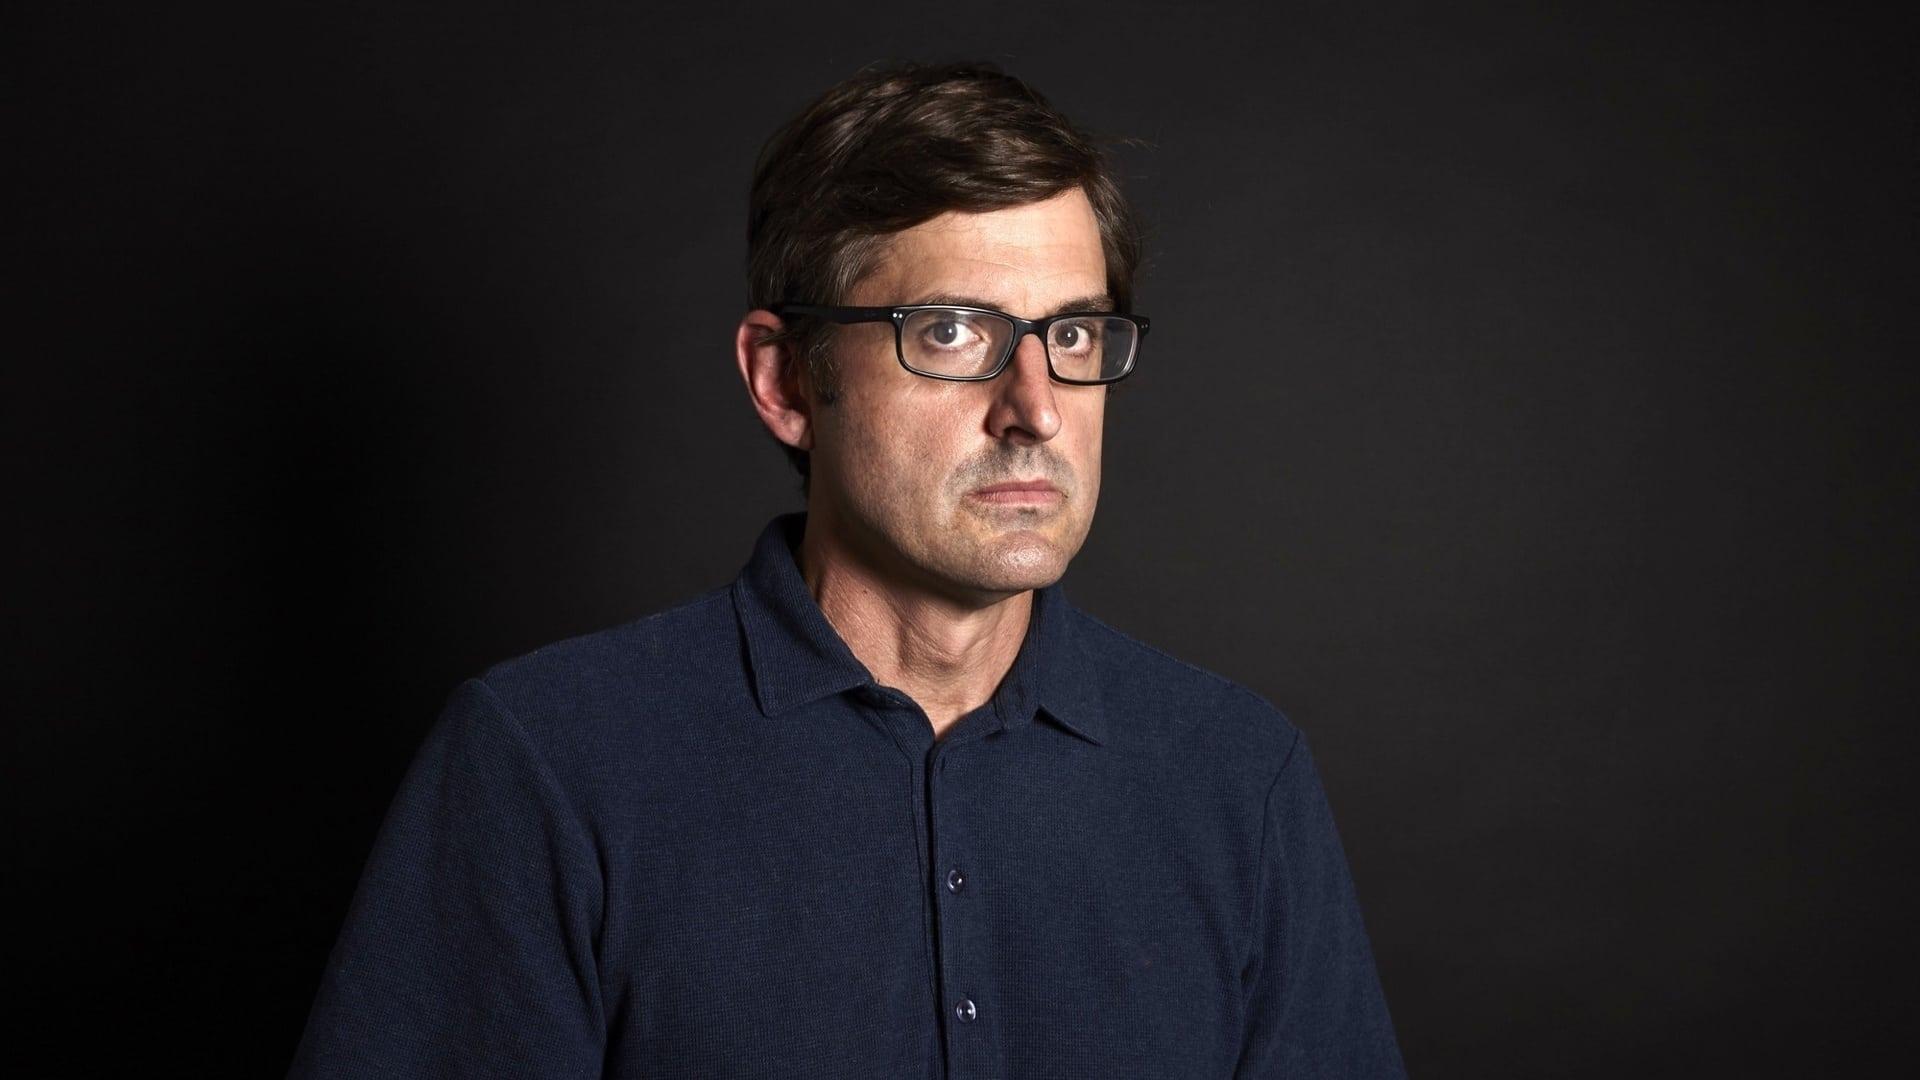 Louis Theroux: Law and Disorder in Johannesburg backdrop